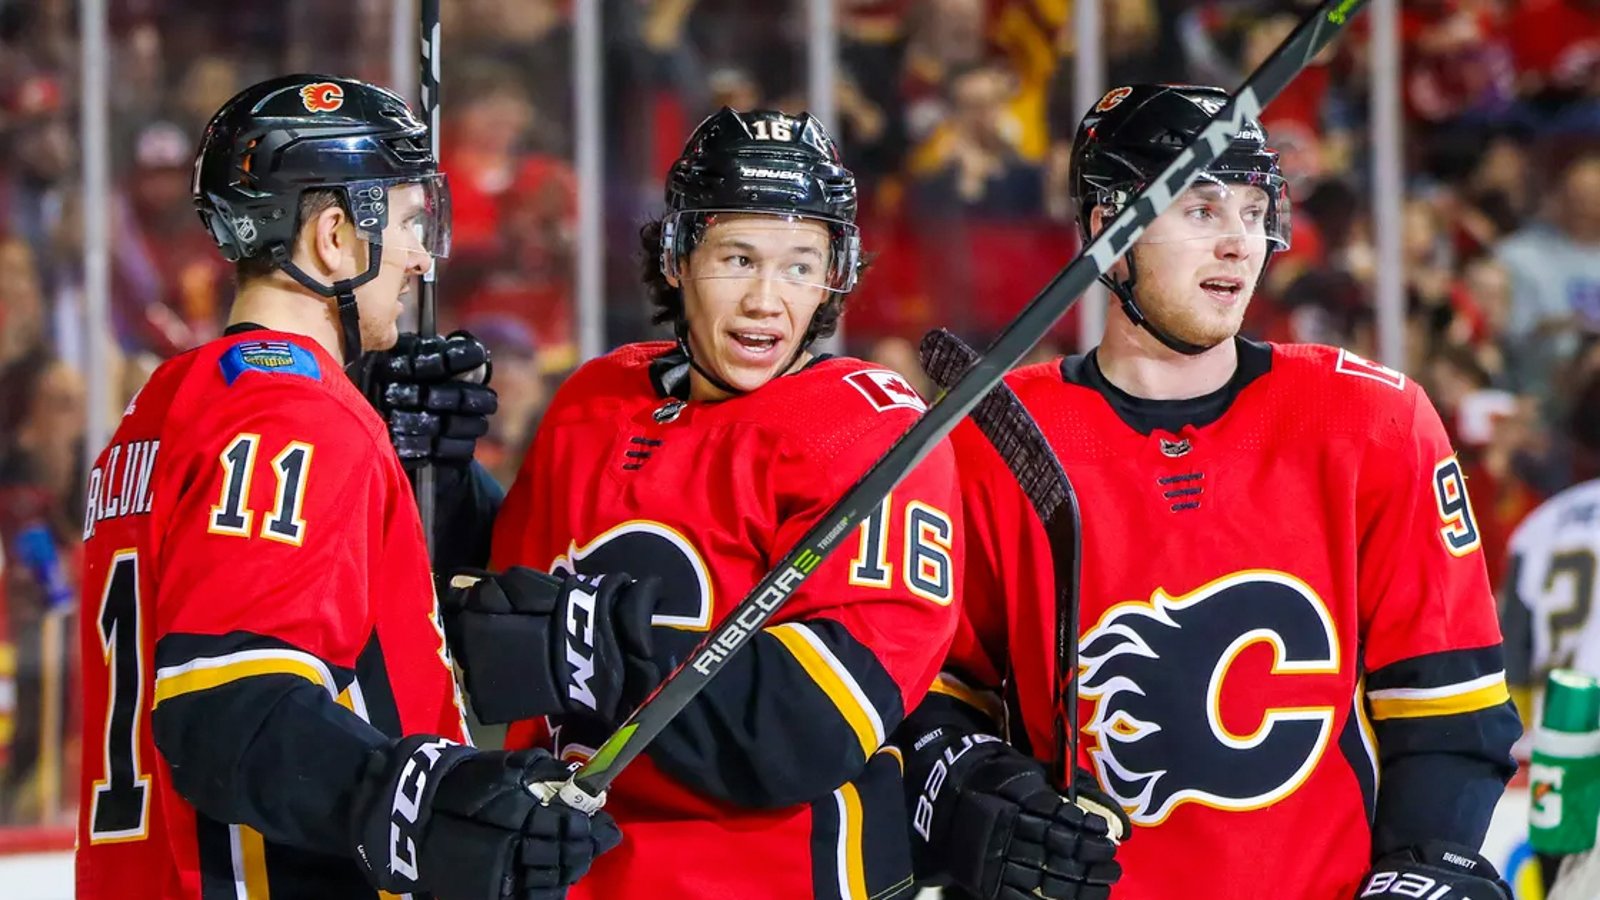 Flames forward leaves team for opportunity to play for China in 2022 Olympics